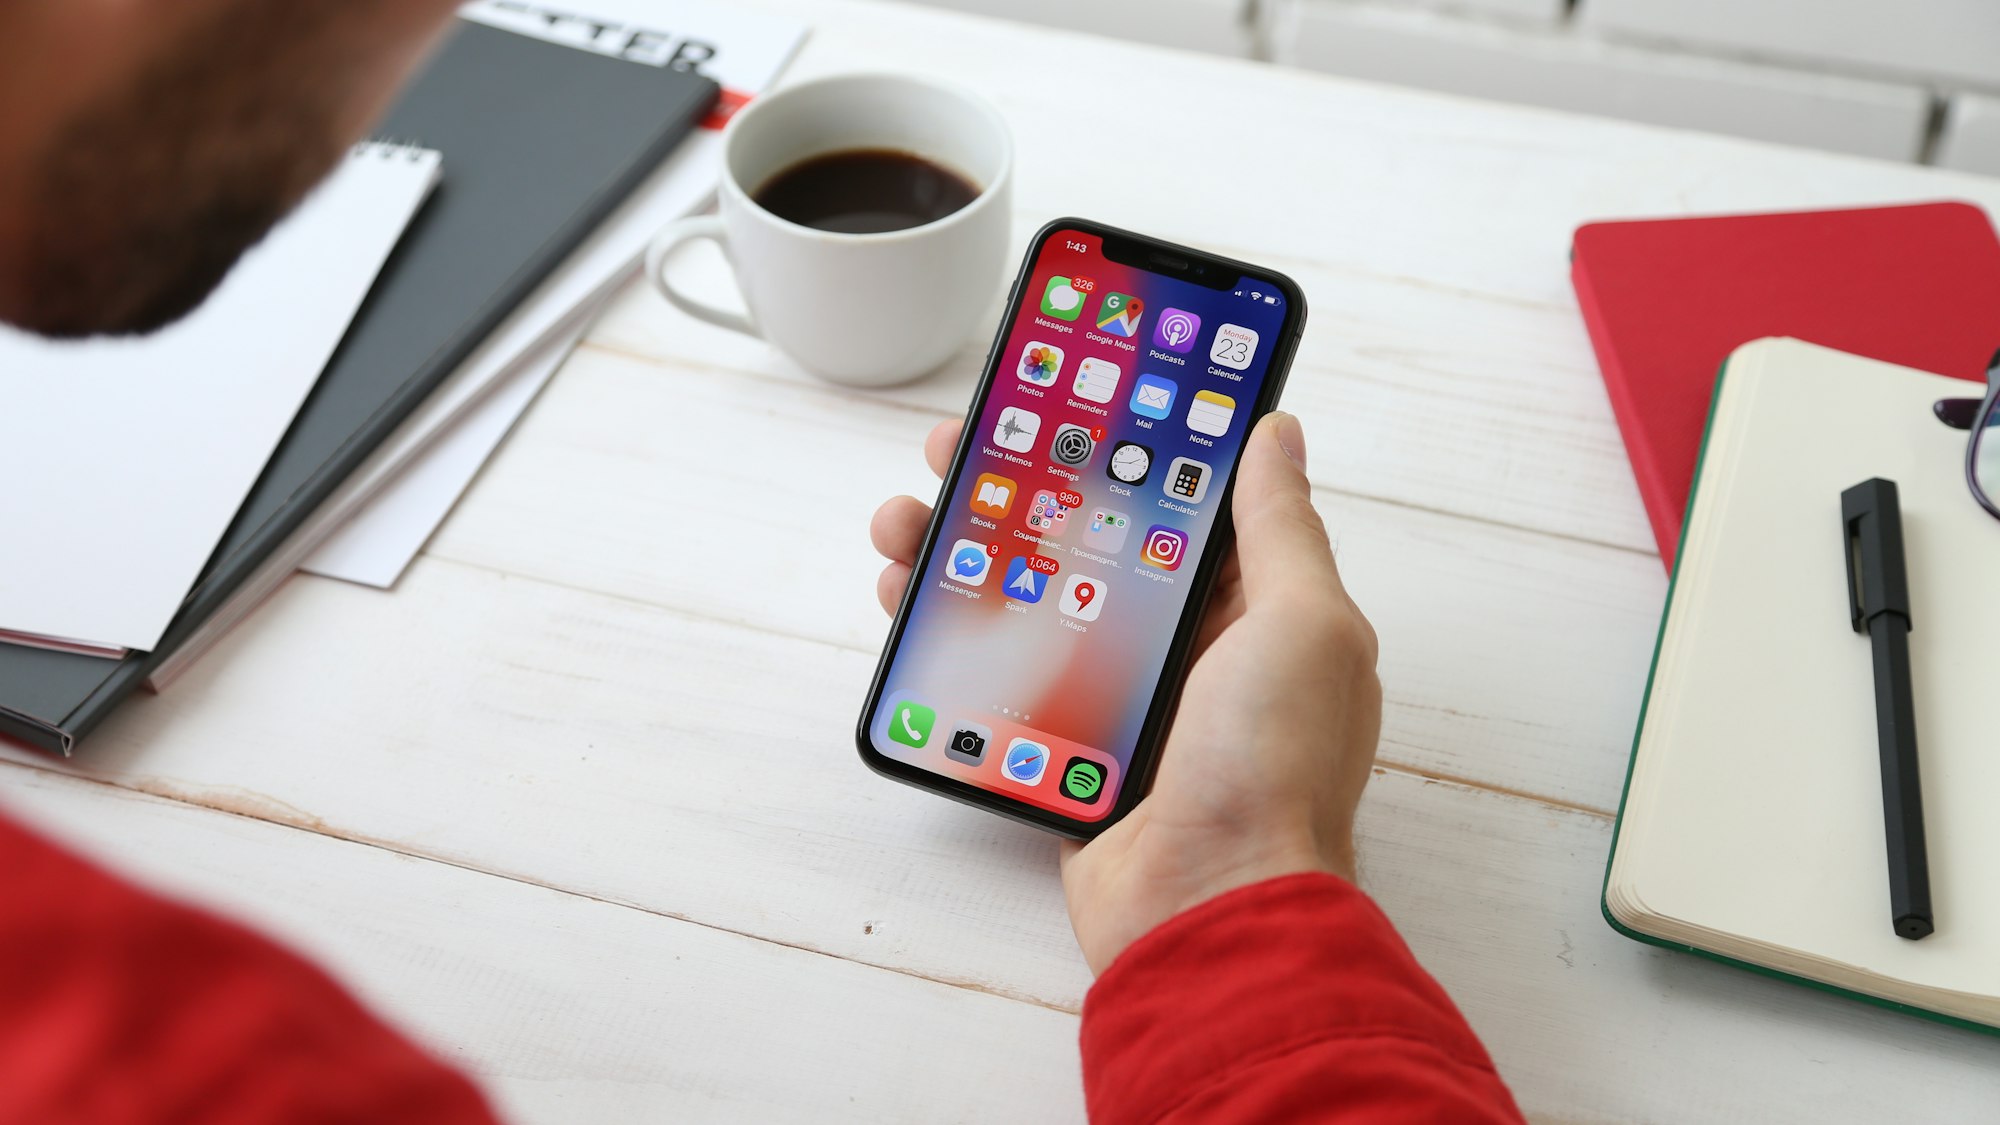 iOS 13.6 – How Apple has adapted to the COVID - 19 situation